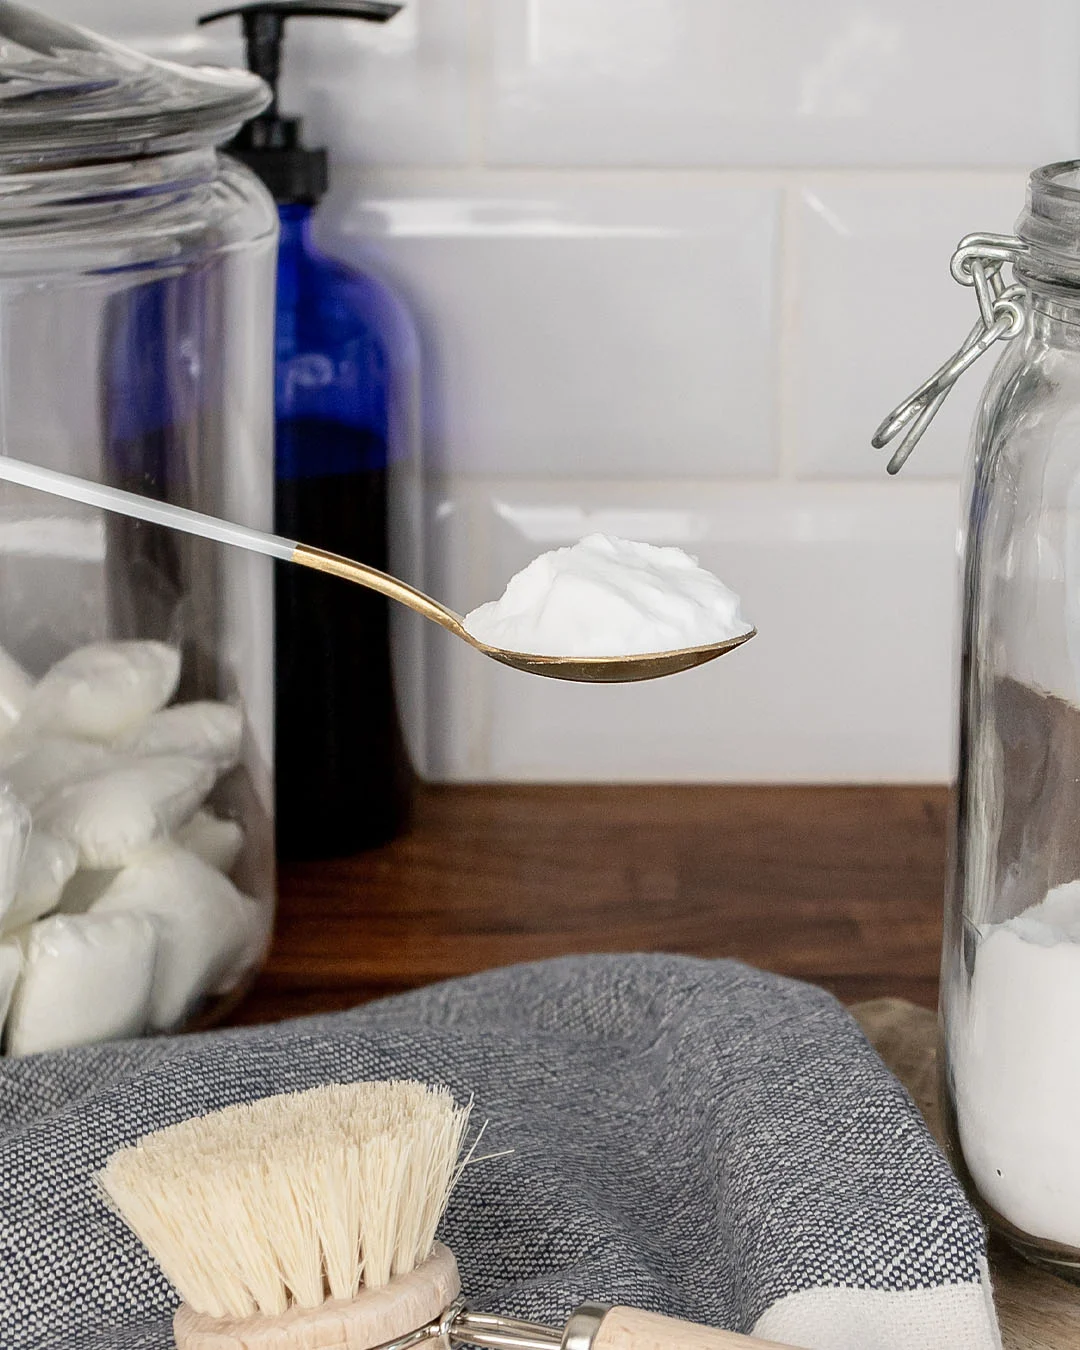 Baking soda makes a great dishwasher detergent substitute.